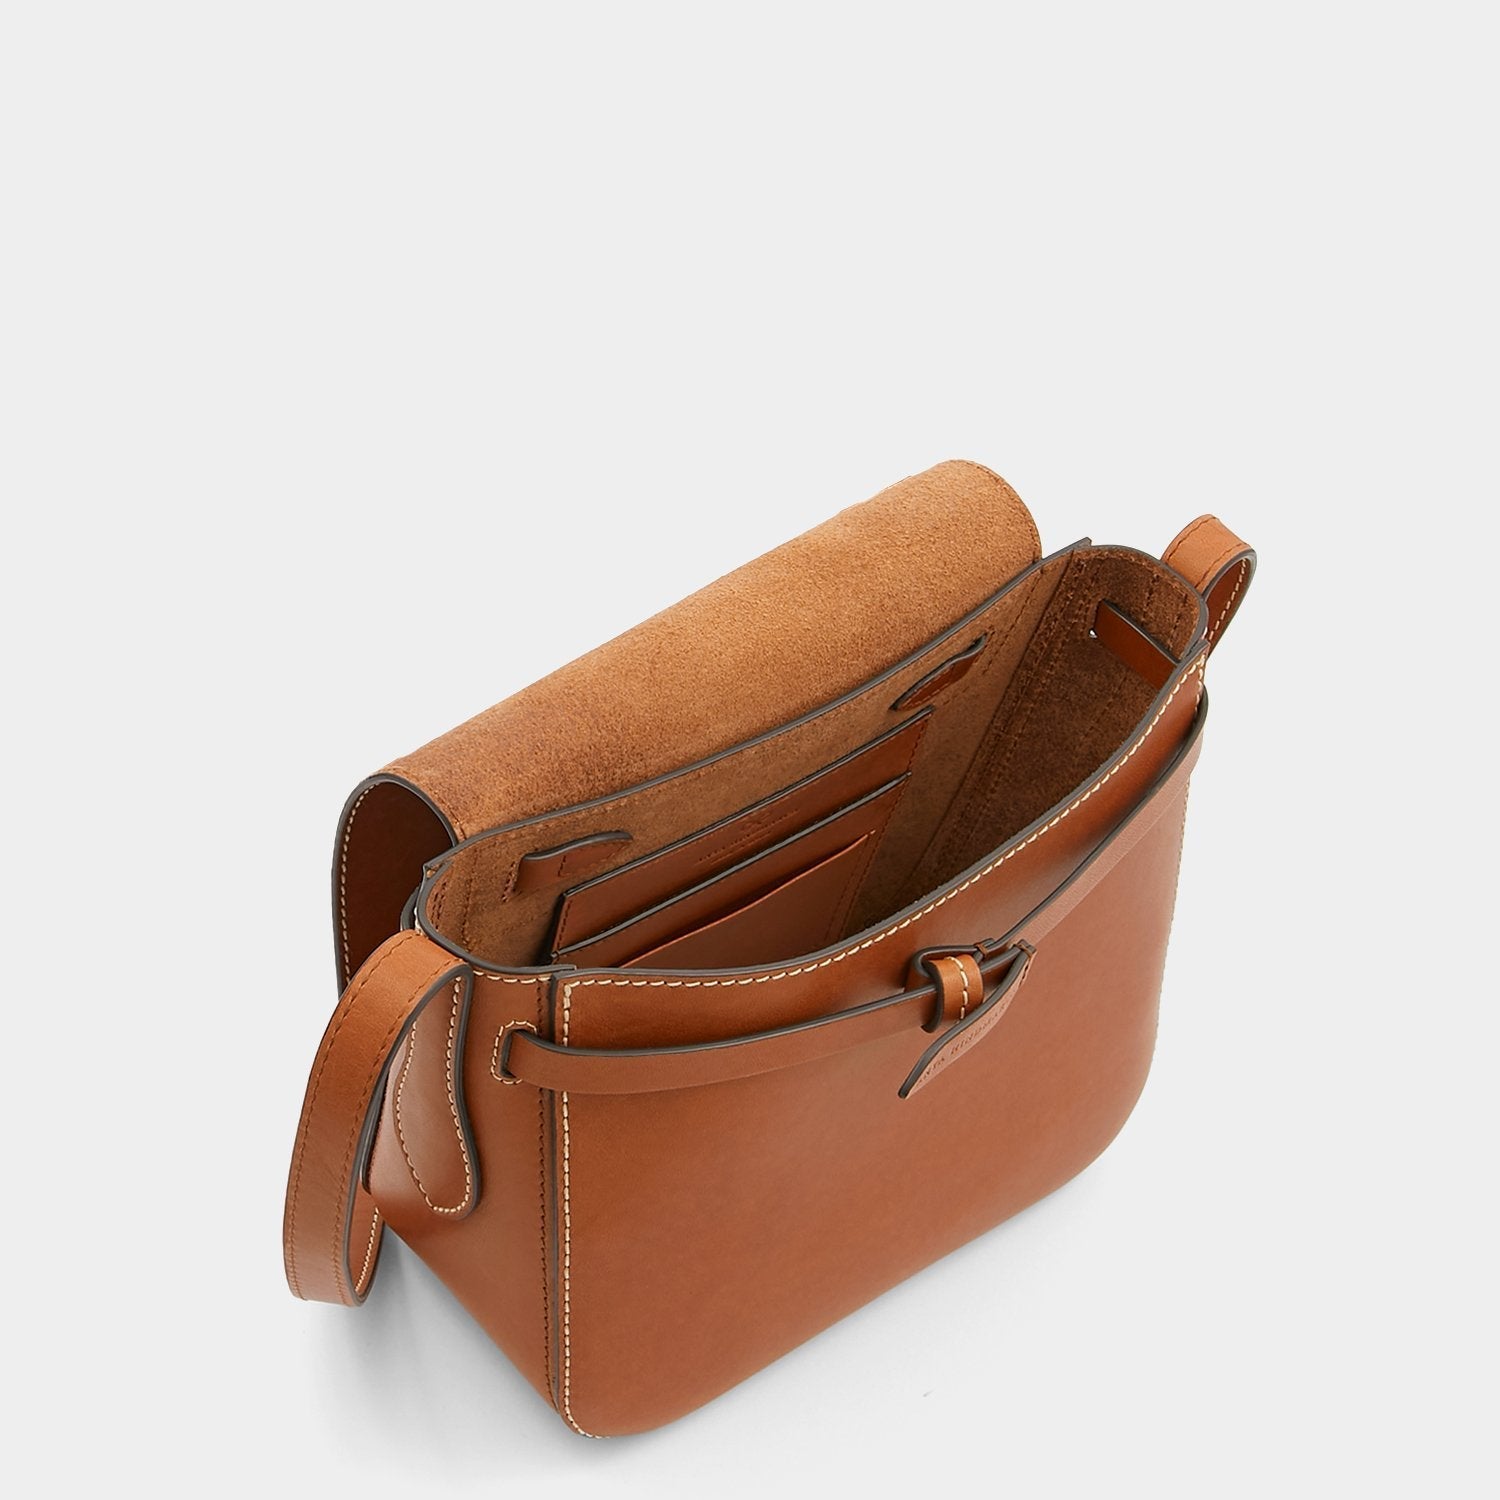 Return to Nature Cross-body -

                  
                    Compostable Leather in Tan -
                  

                  Anya Hindmarch EU
